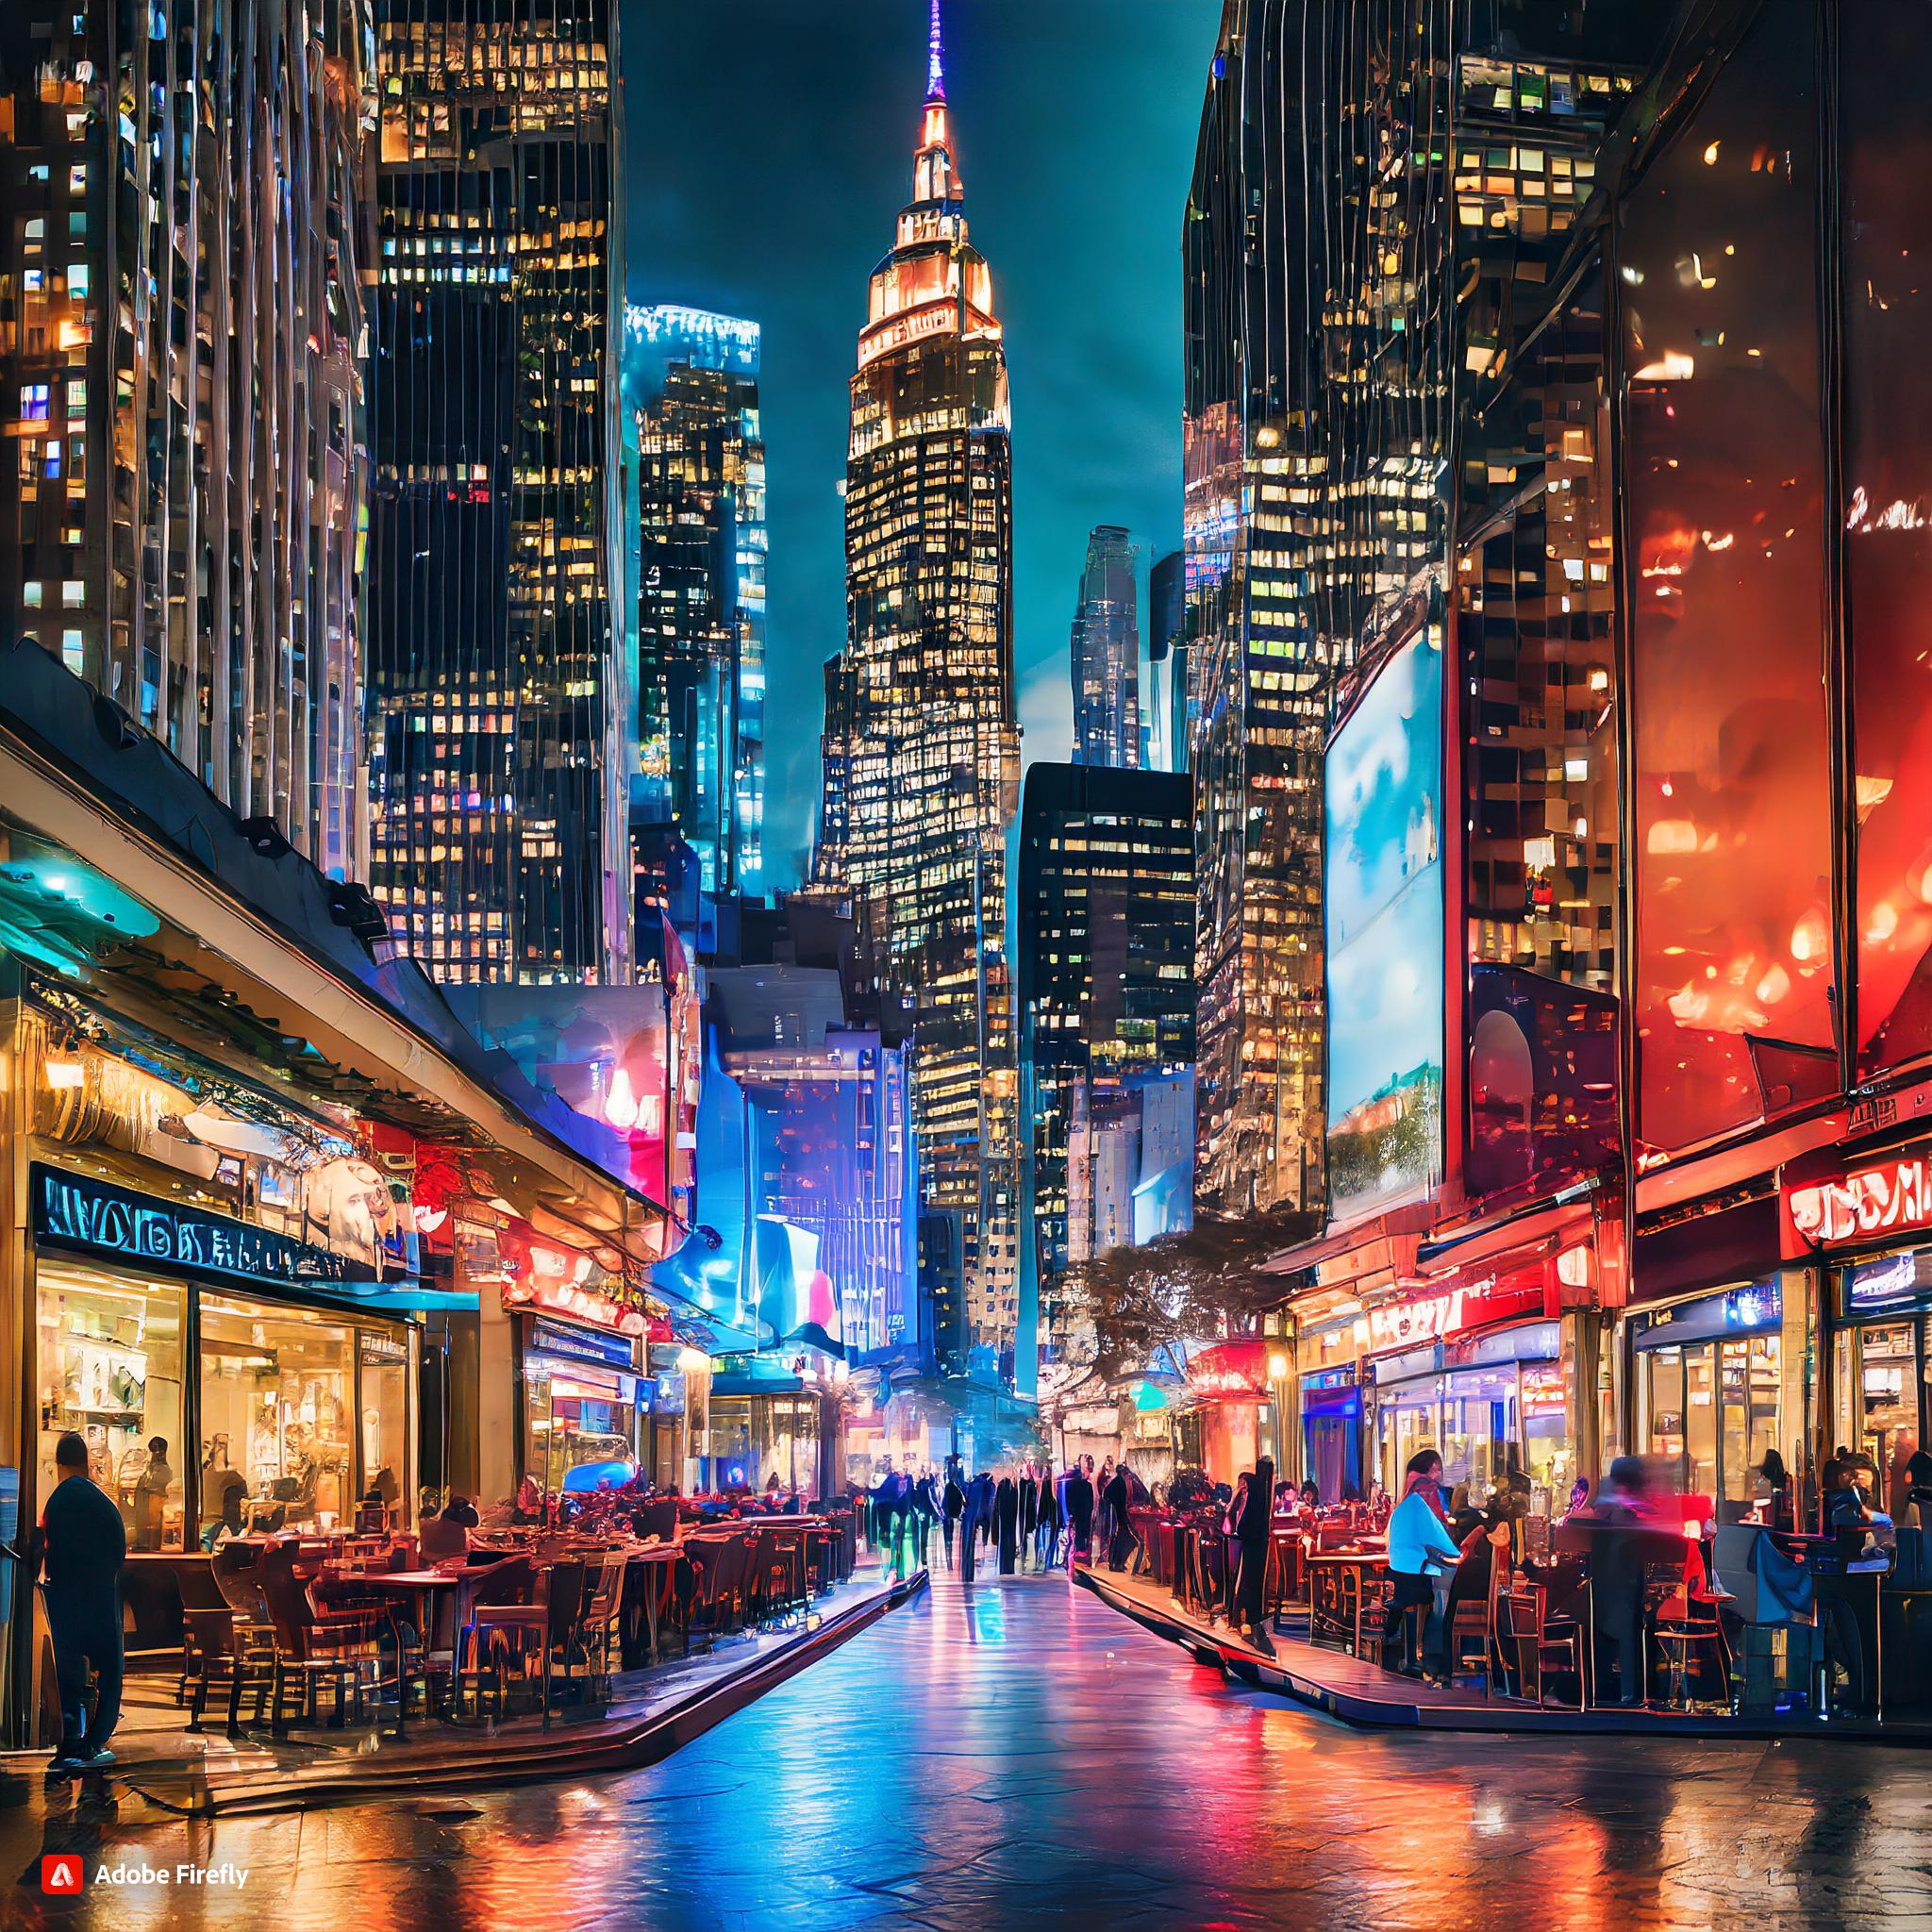  lively new york city at nighttime with neon lit skyscrapers and moody jazz clubs